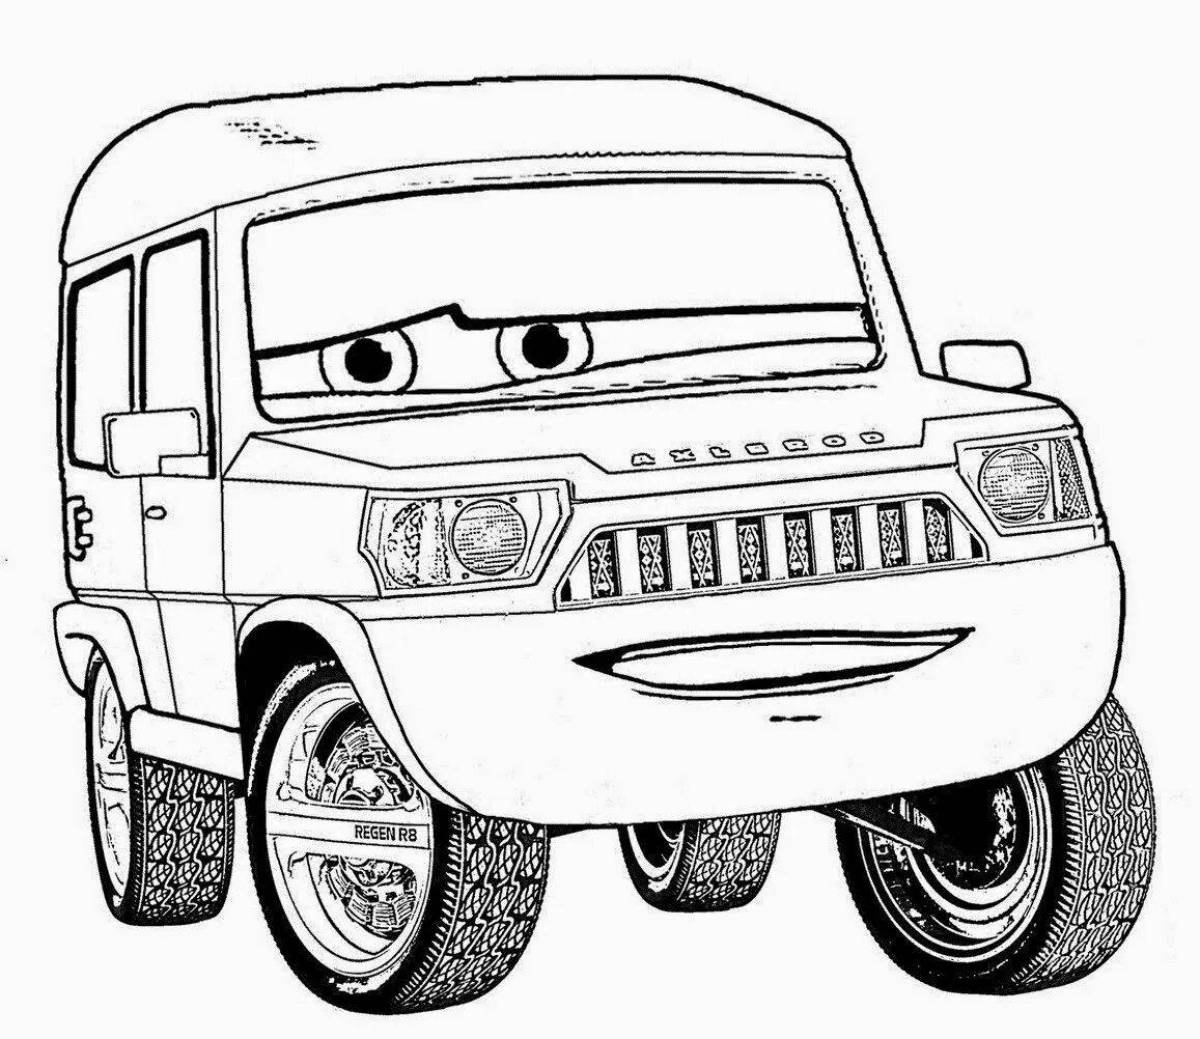 Frank's outstanding cars coloring book